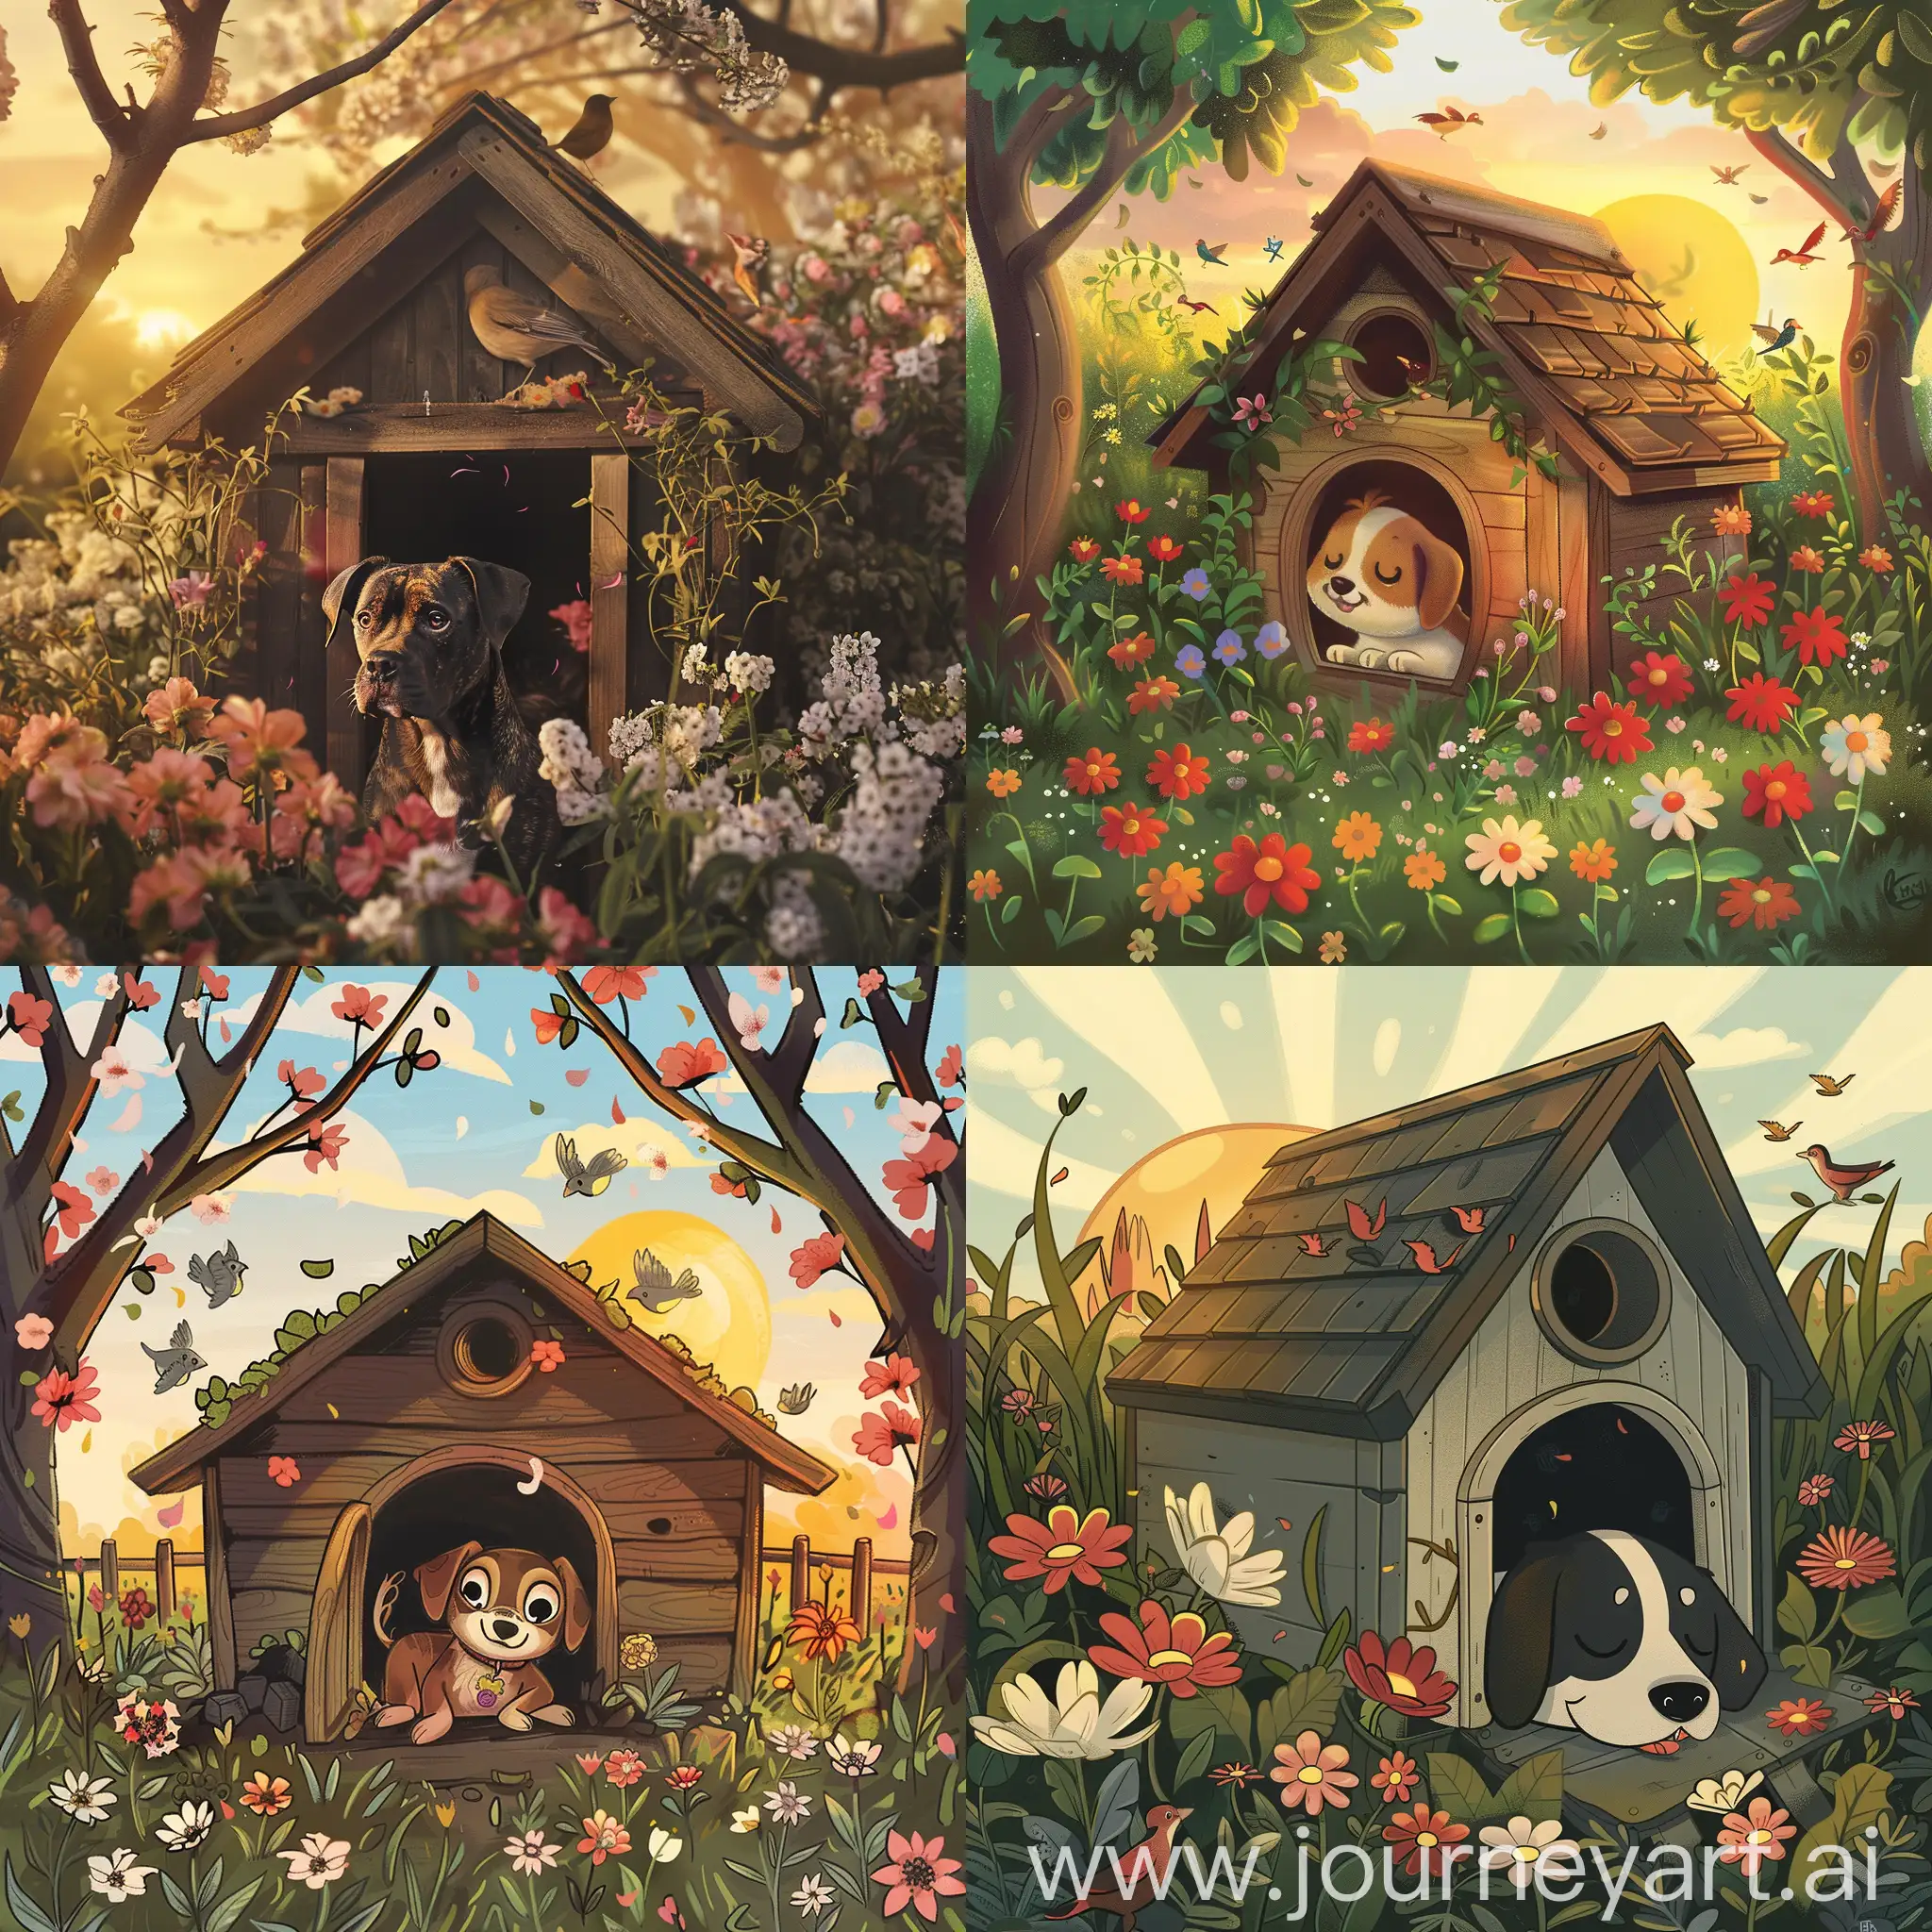 Imagine Sparky waking up in his cozy doghouse, surrounded by blooming flowers and chirping birds, with the sun rising in the background.